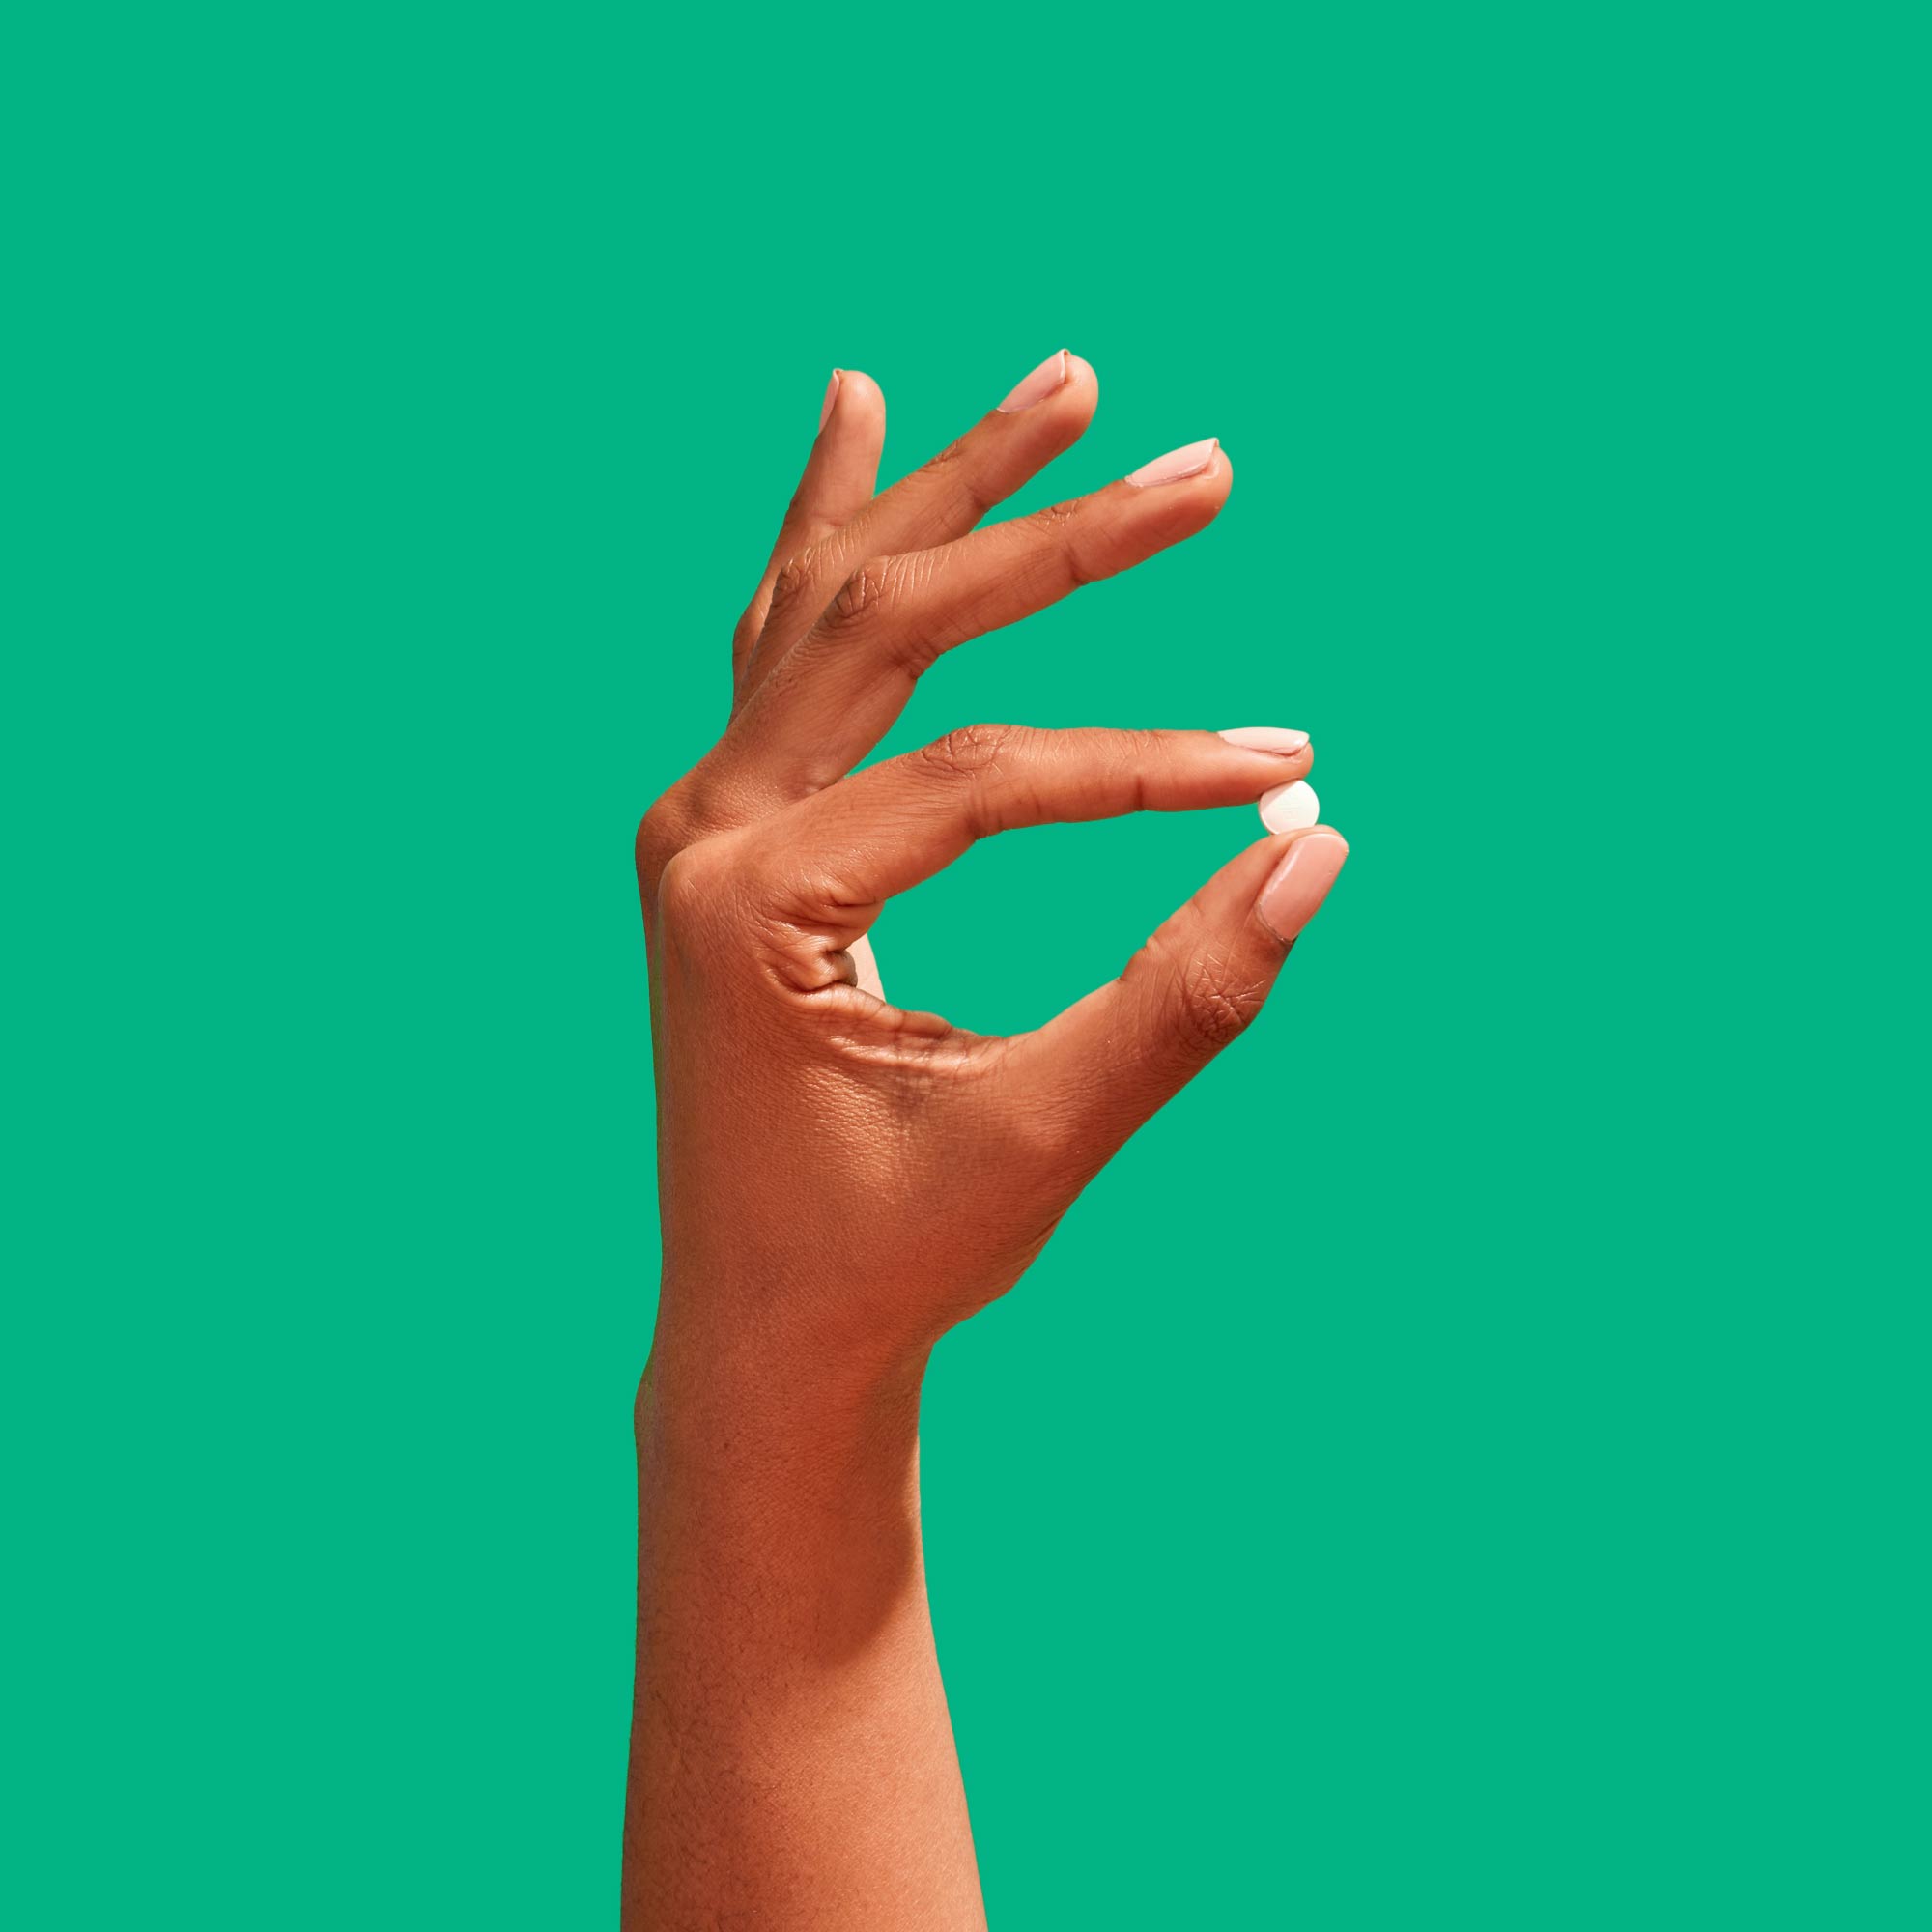 Hand holding Ella emergency contraception pill to prevent pregnancy on a green background